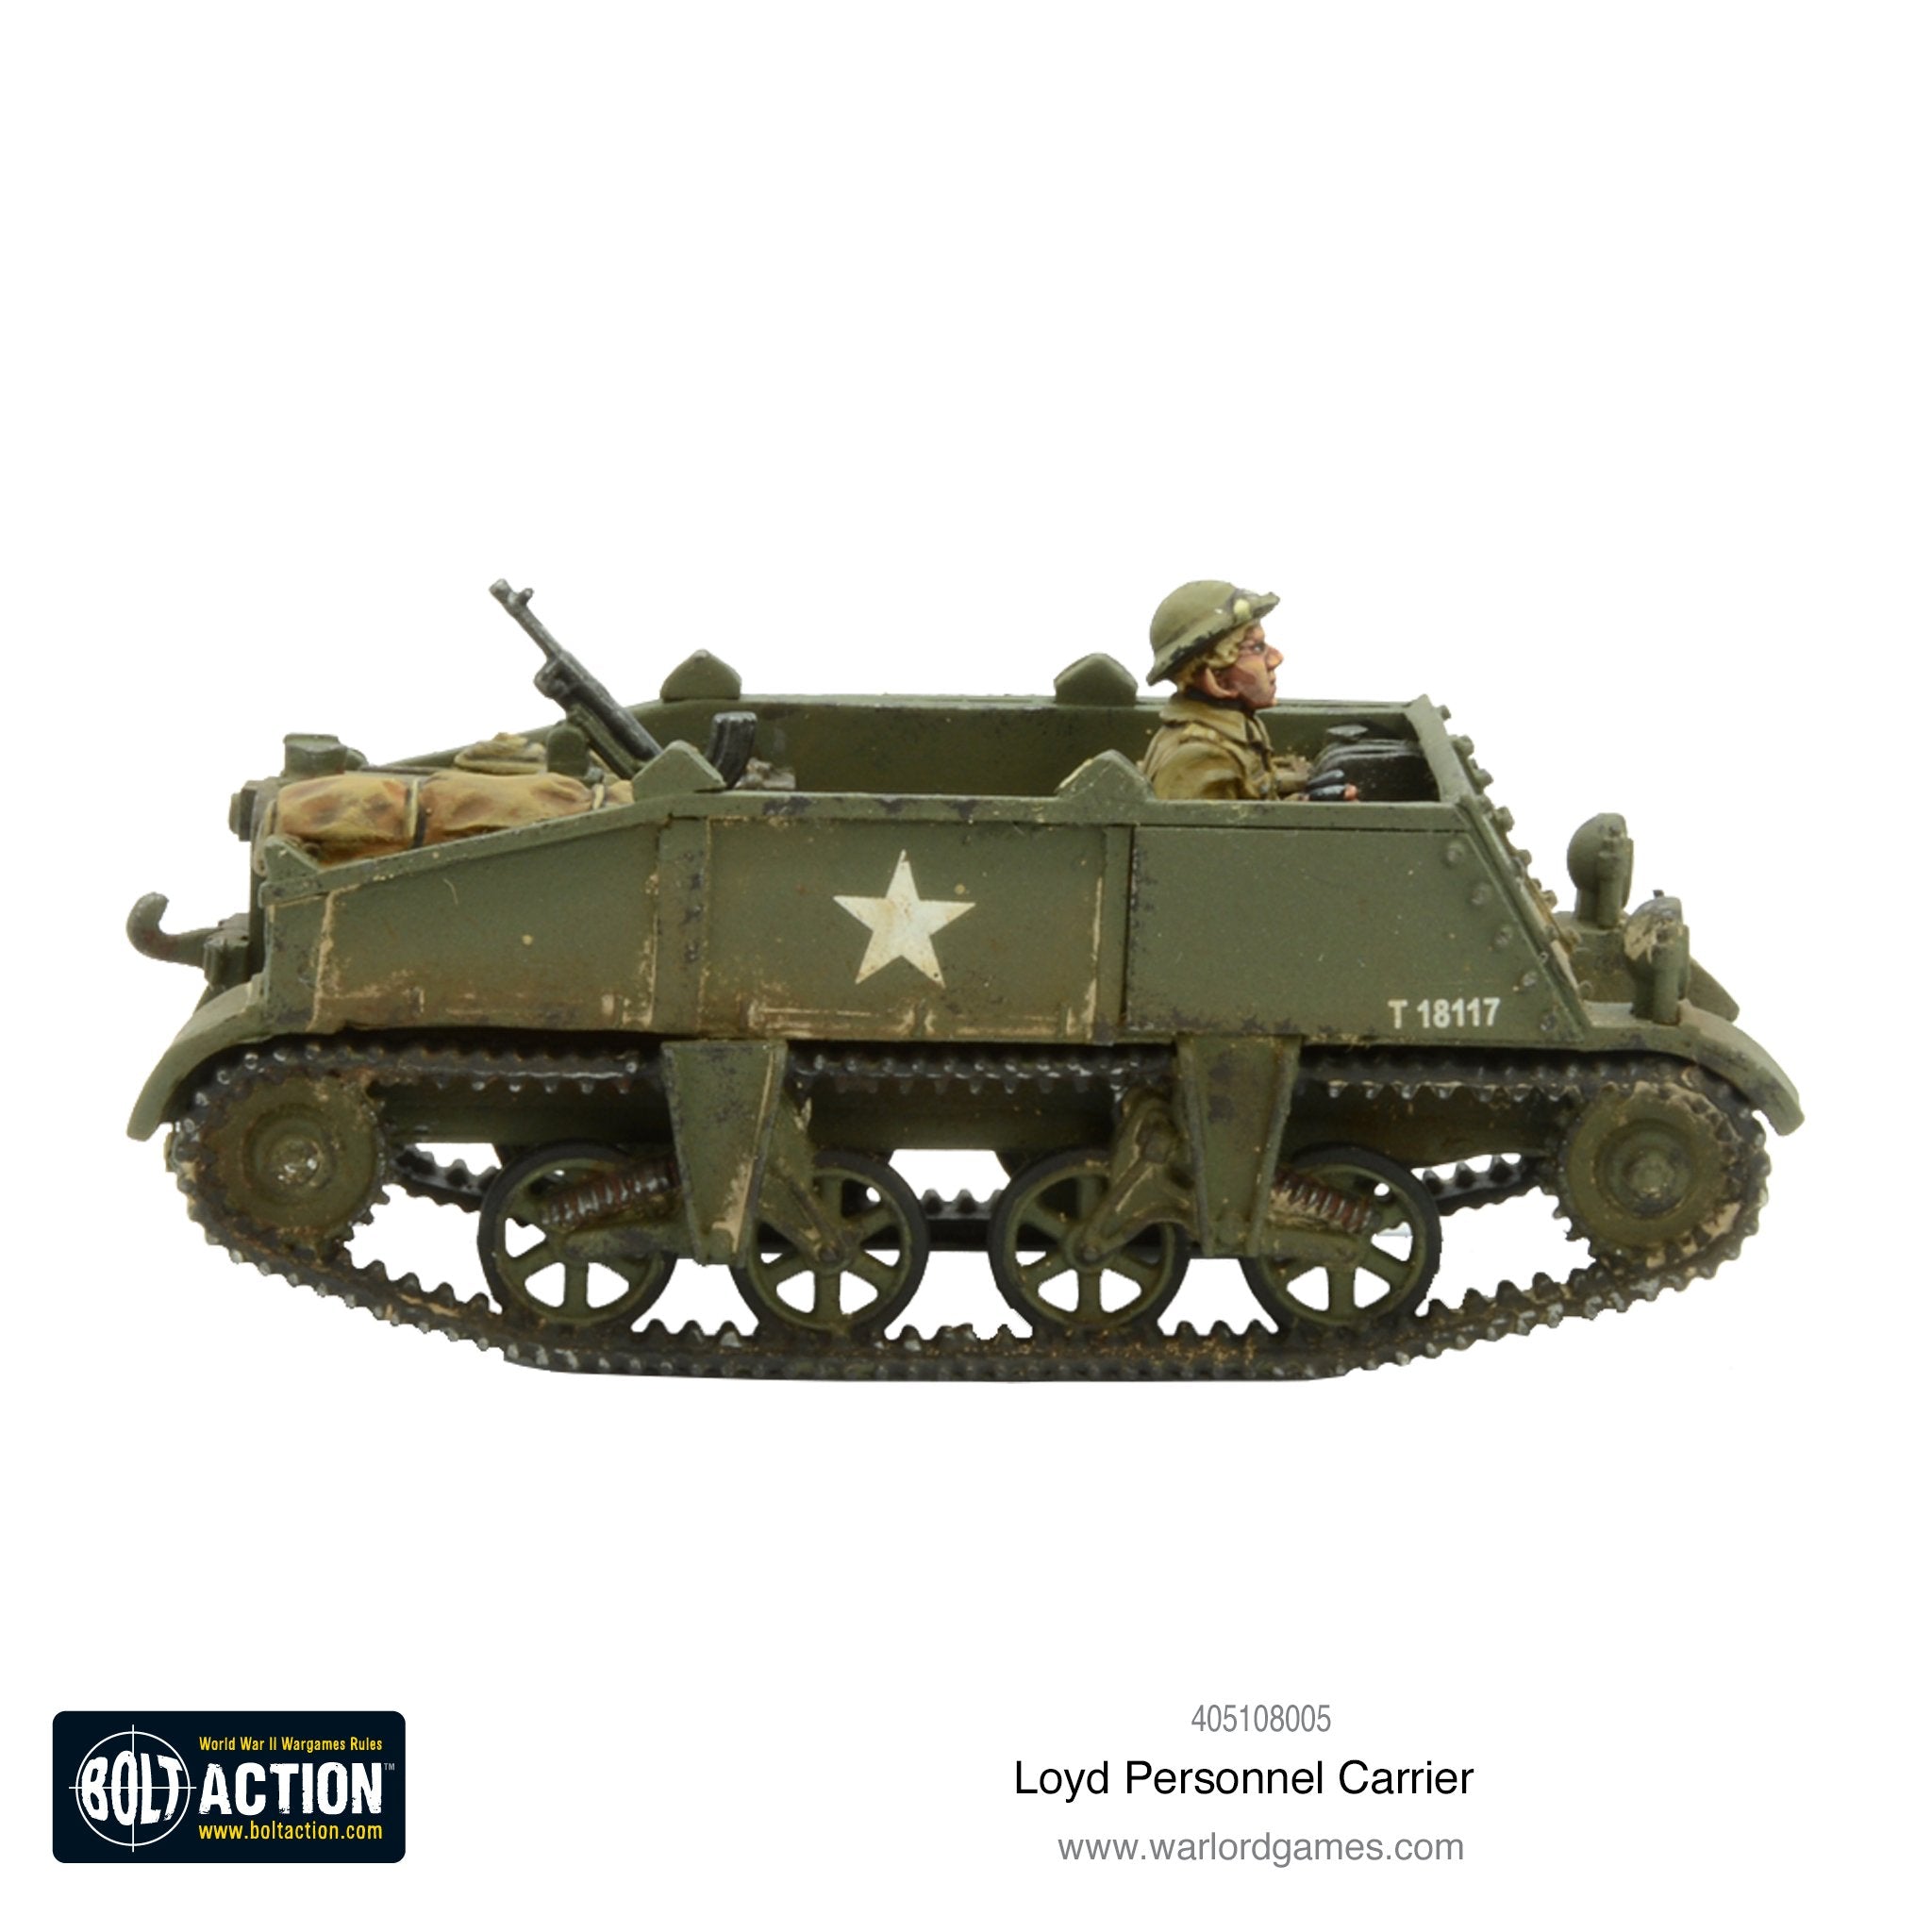 Loyd Personnel Carrier